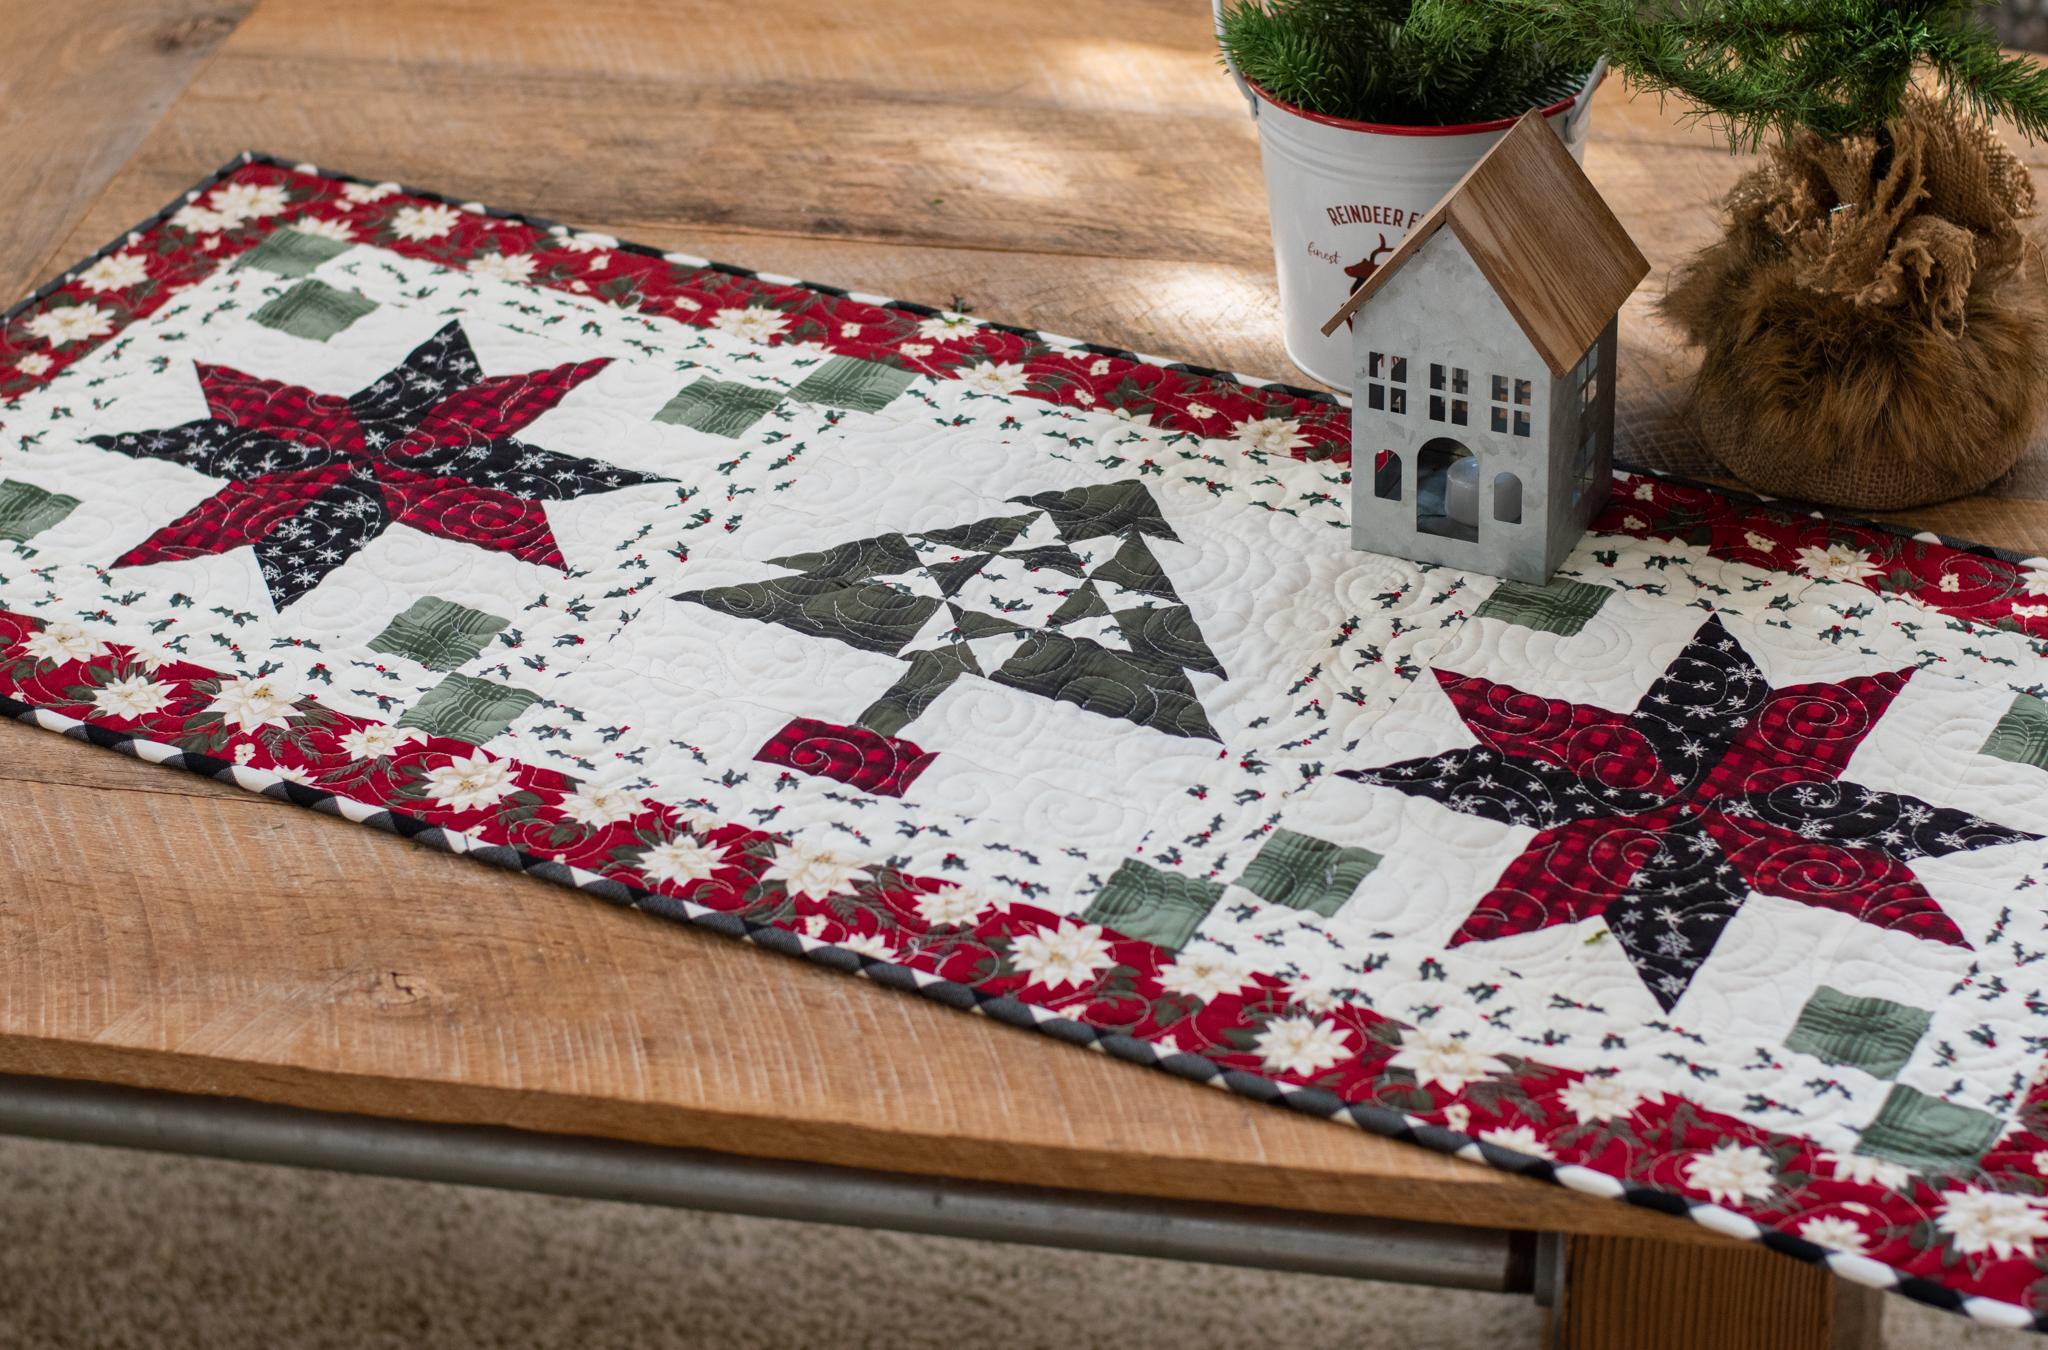 quilted Table runner for Christmas